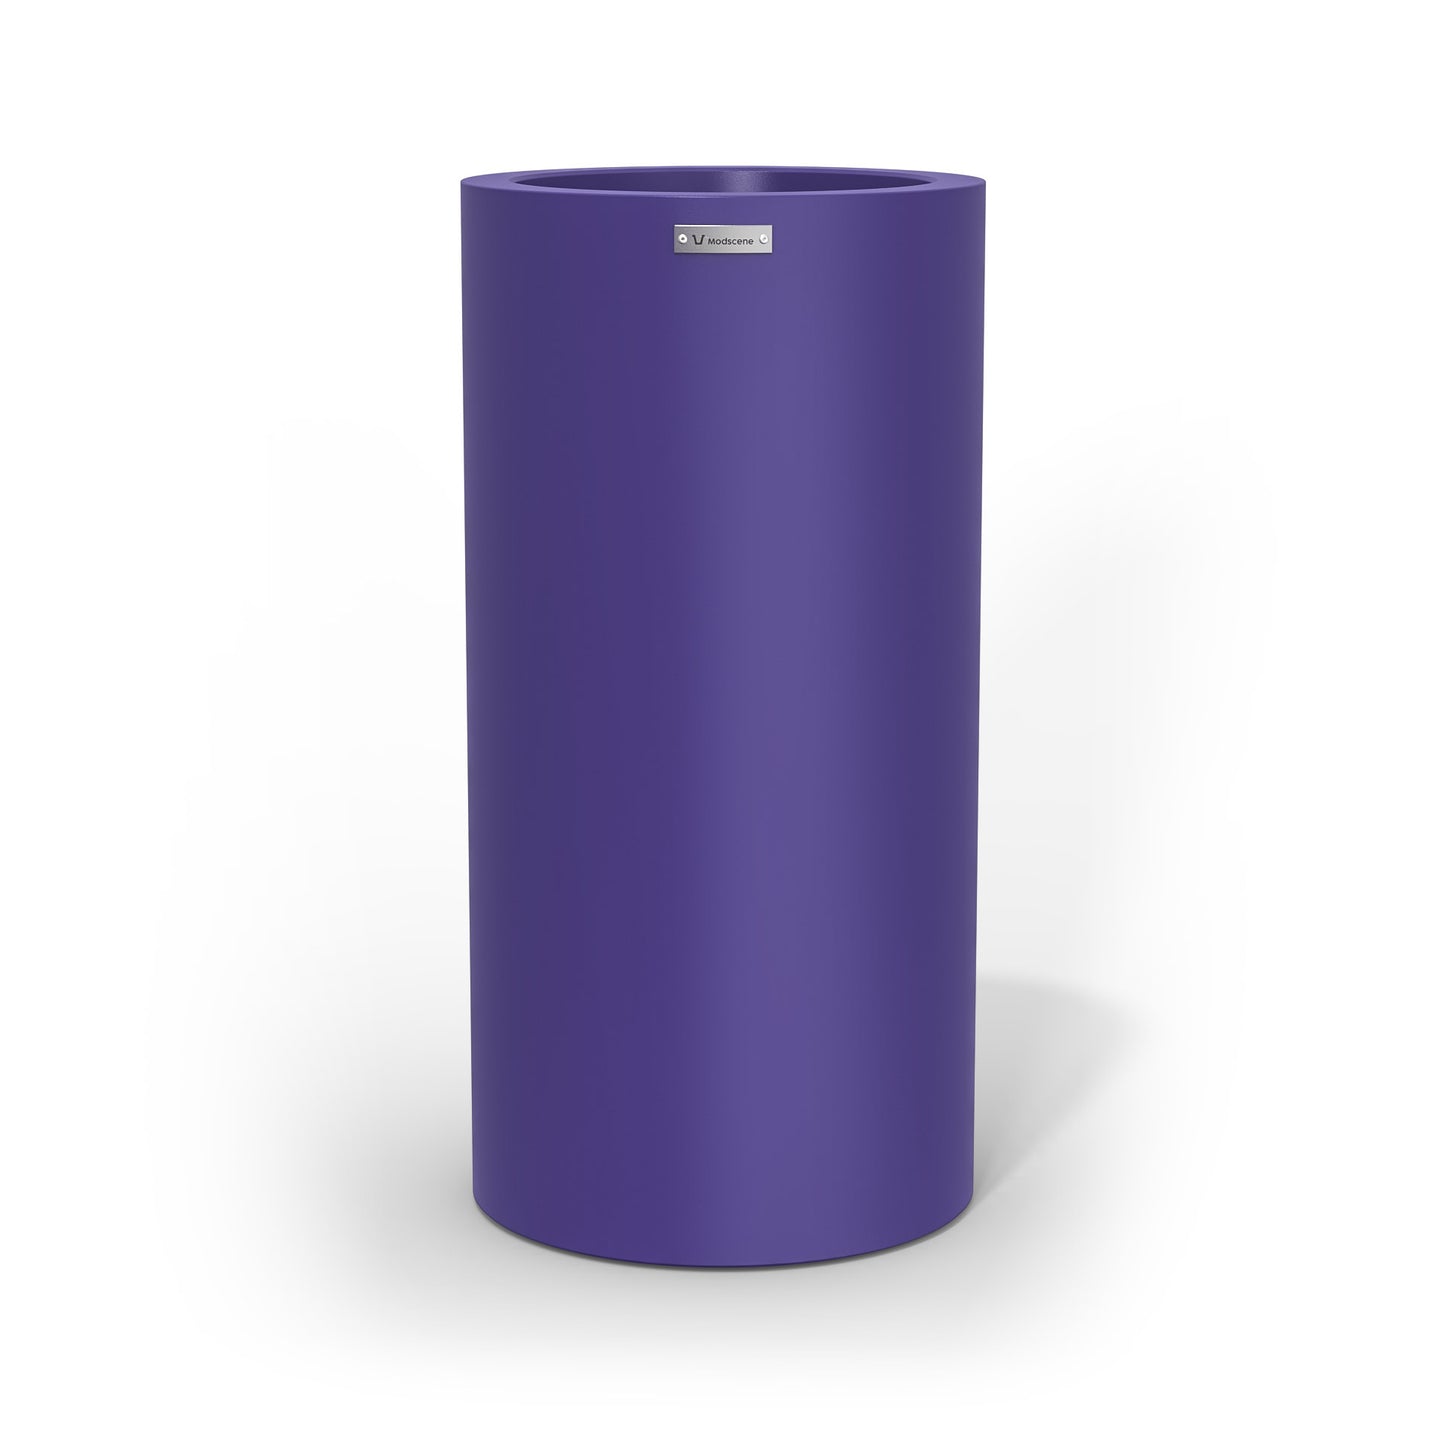 A tall cigar cylinder planter pot in purple made by Modscene. Australian planters.